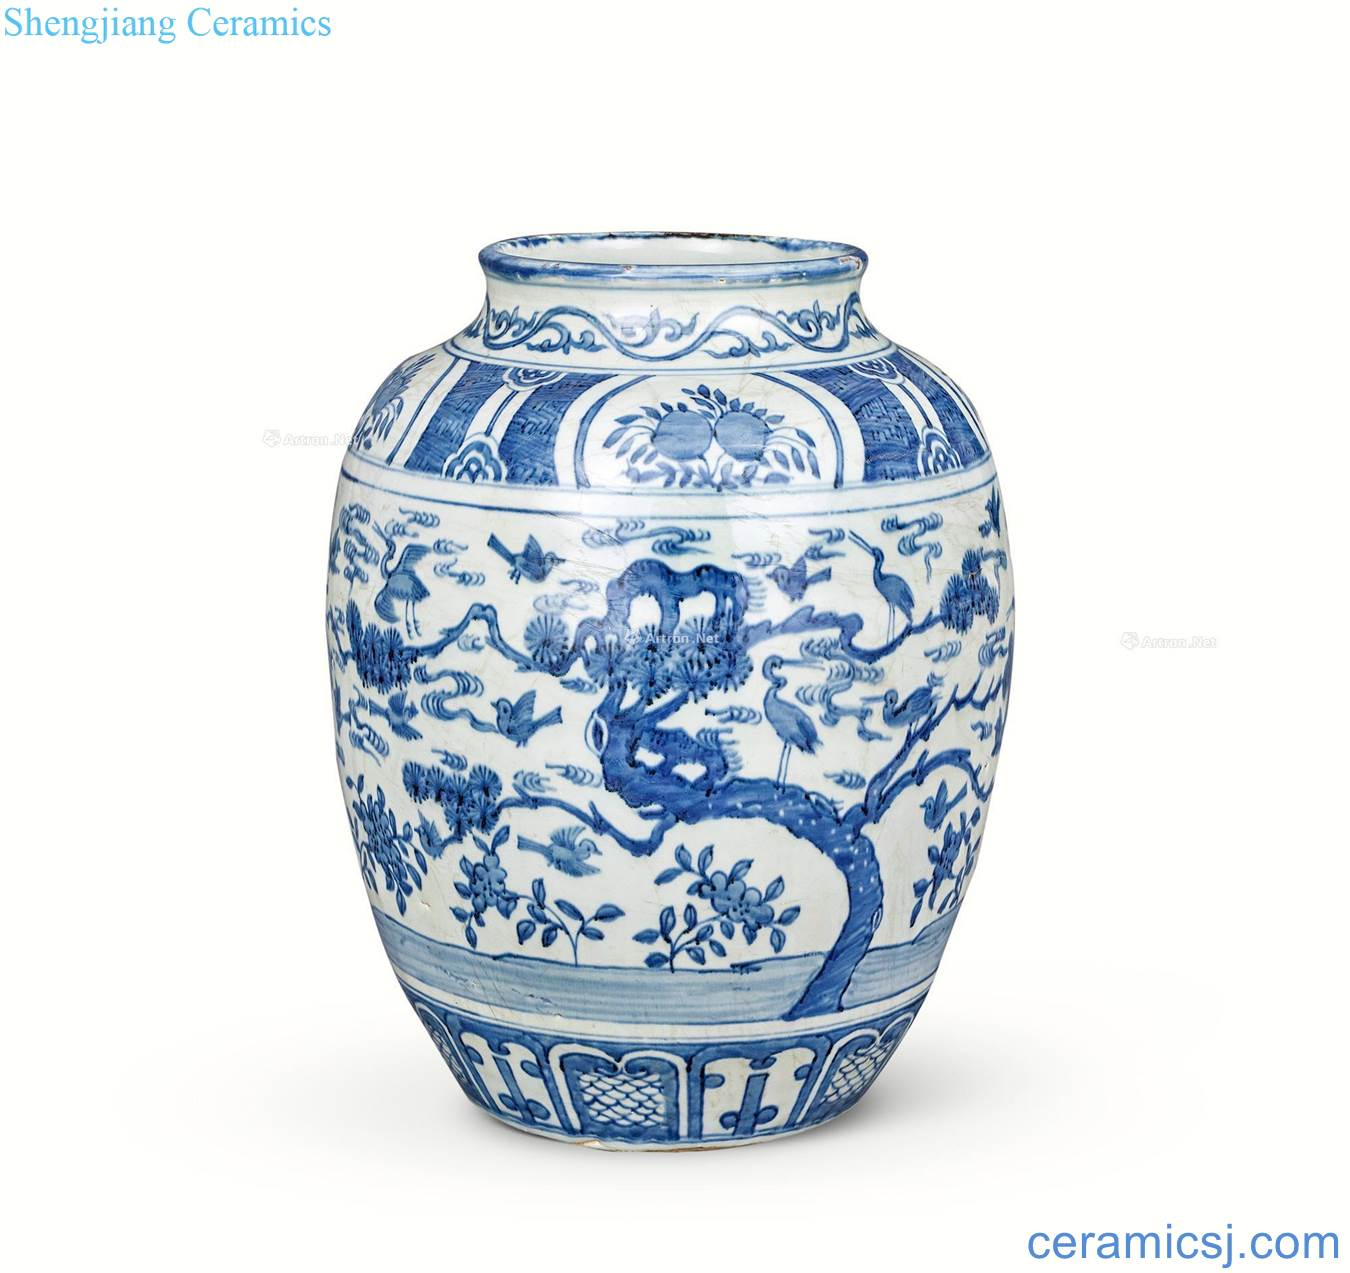 In the Ming dynasty James t. c. na was published grain canister